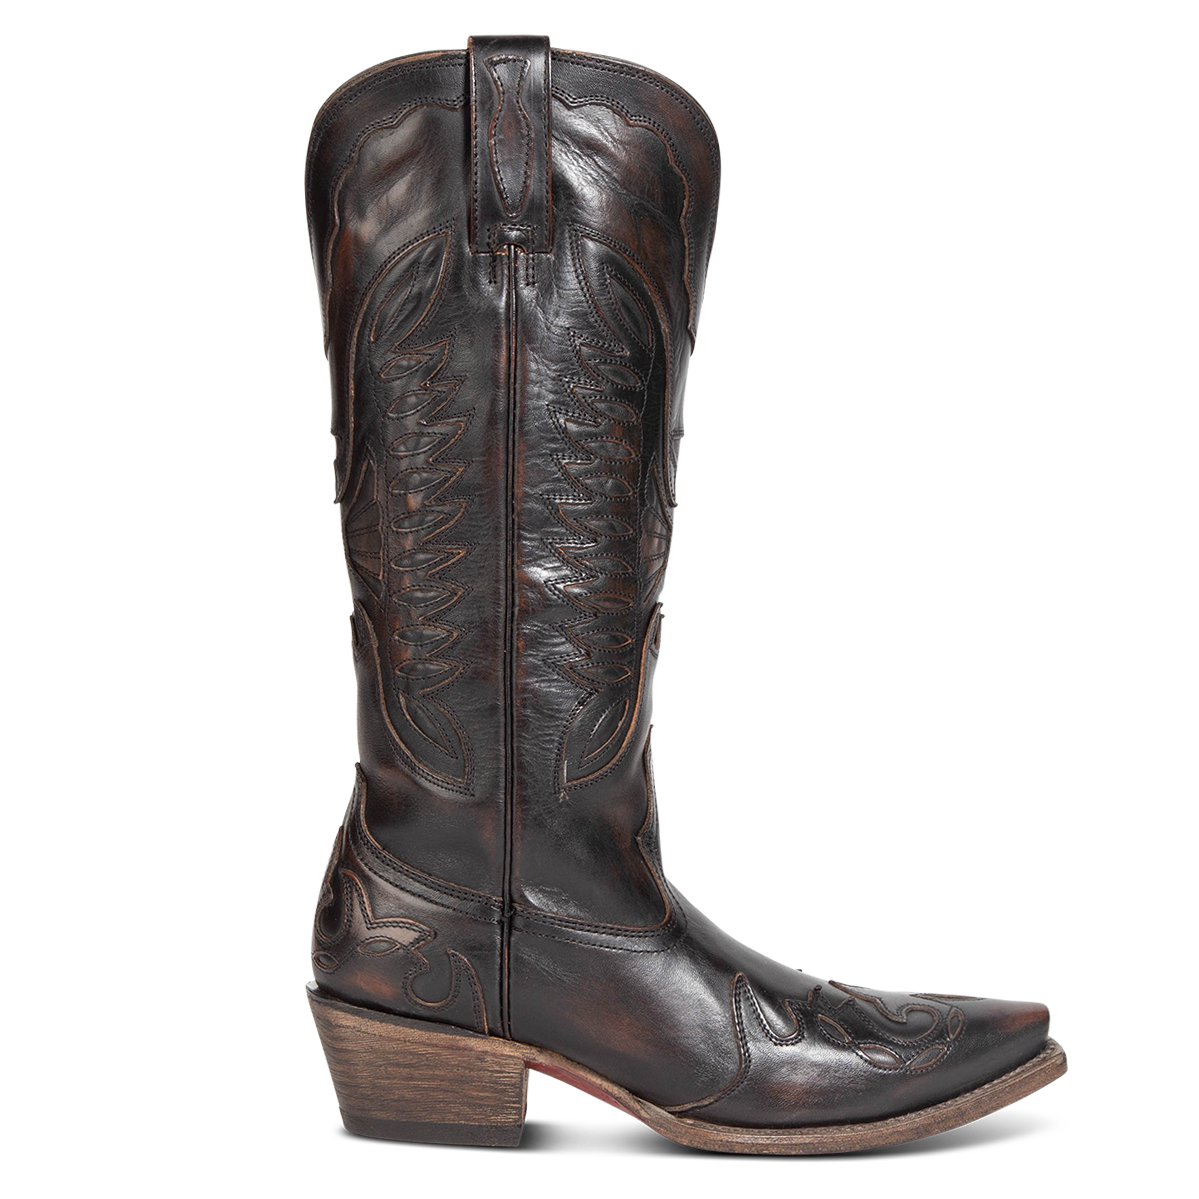 FREEBIRD women's Willie black leather western boot with textured design, stitch detailing, and snip toe construction